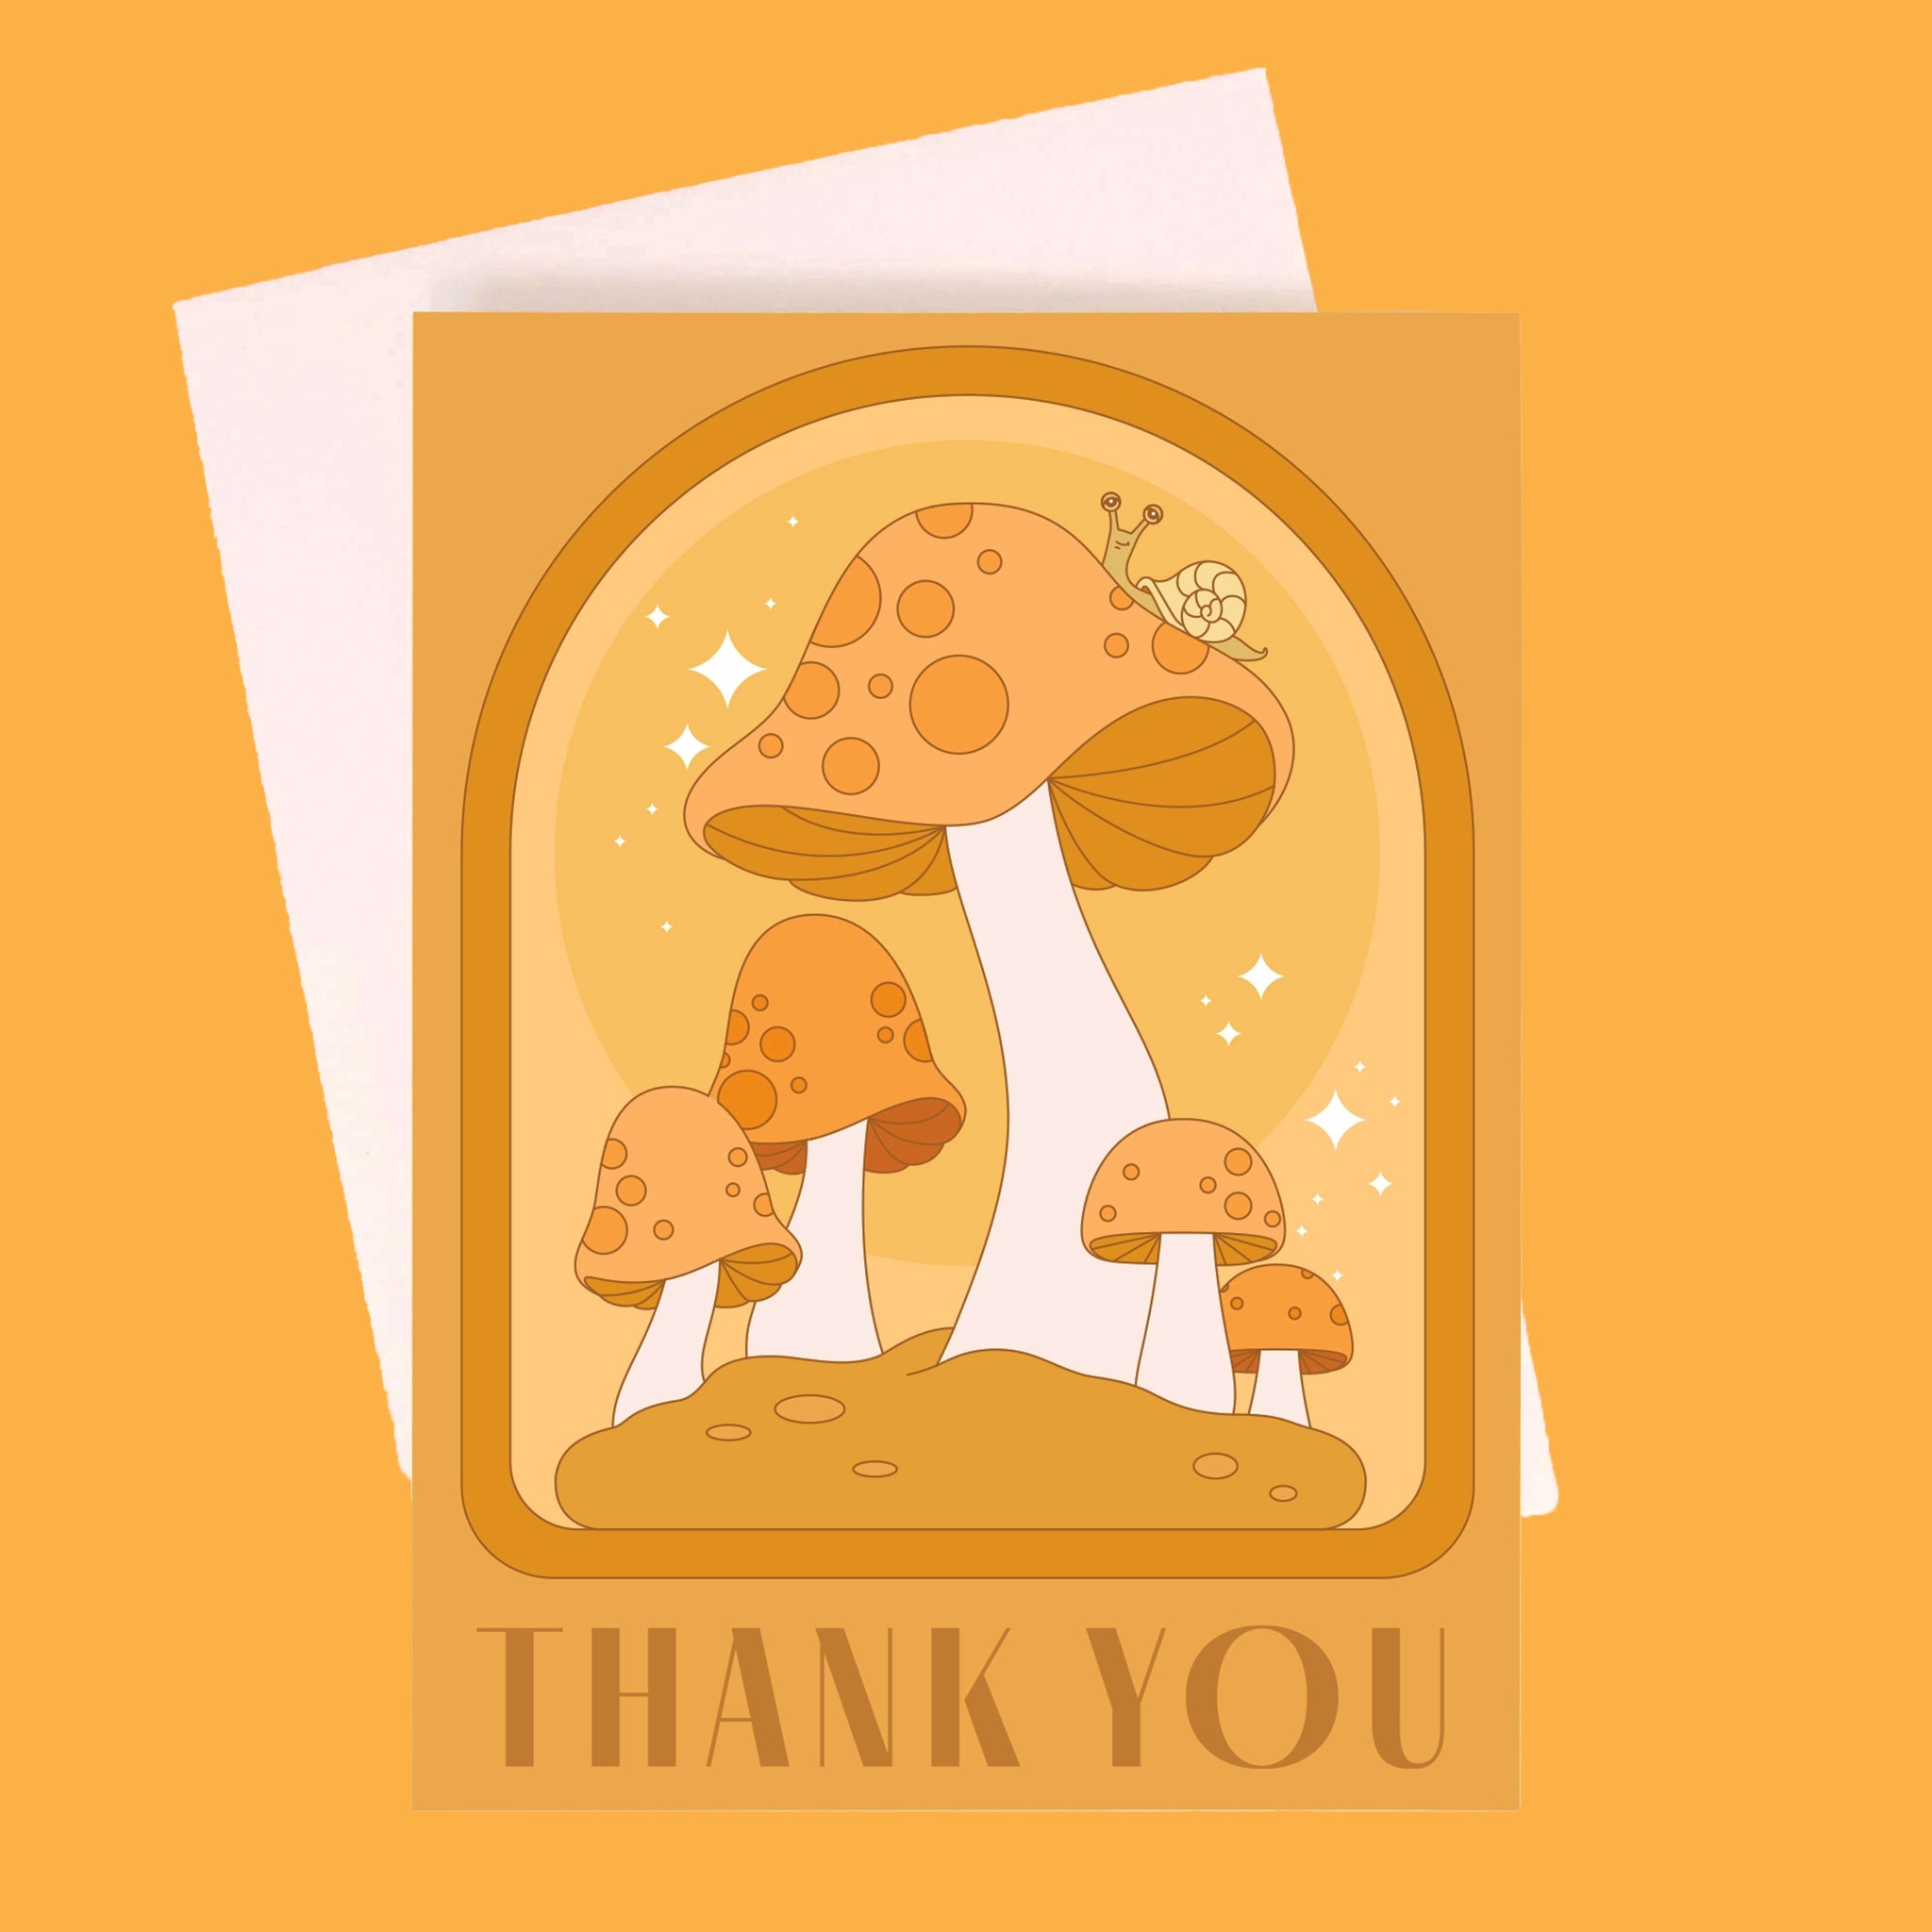 On a yellow  background is an orange greeting card with an arched design, mushroom illustrations with a little snail on top of the largest one and text along the bottom that reads, "Thank You".